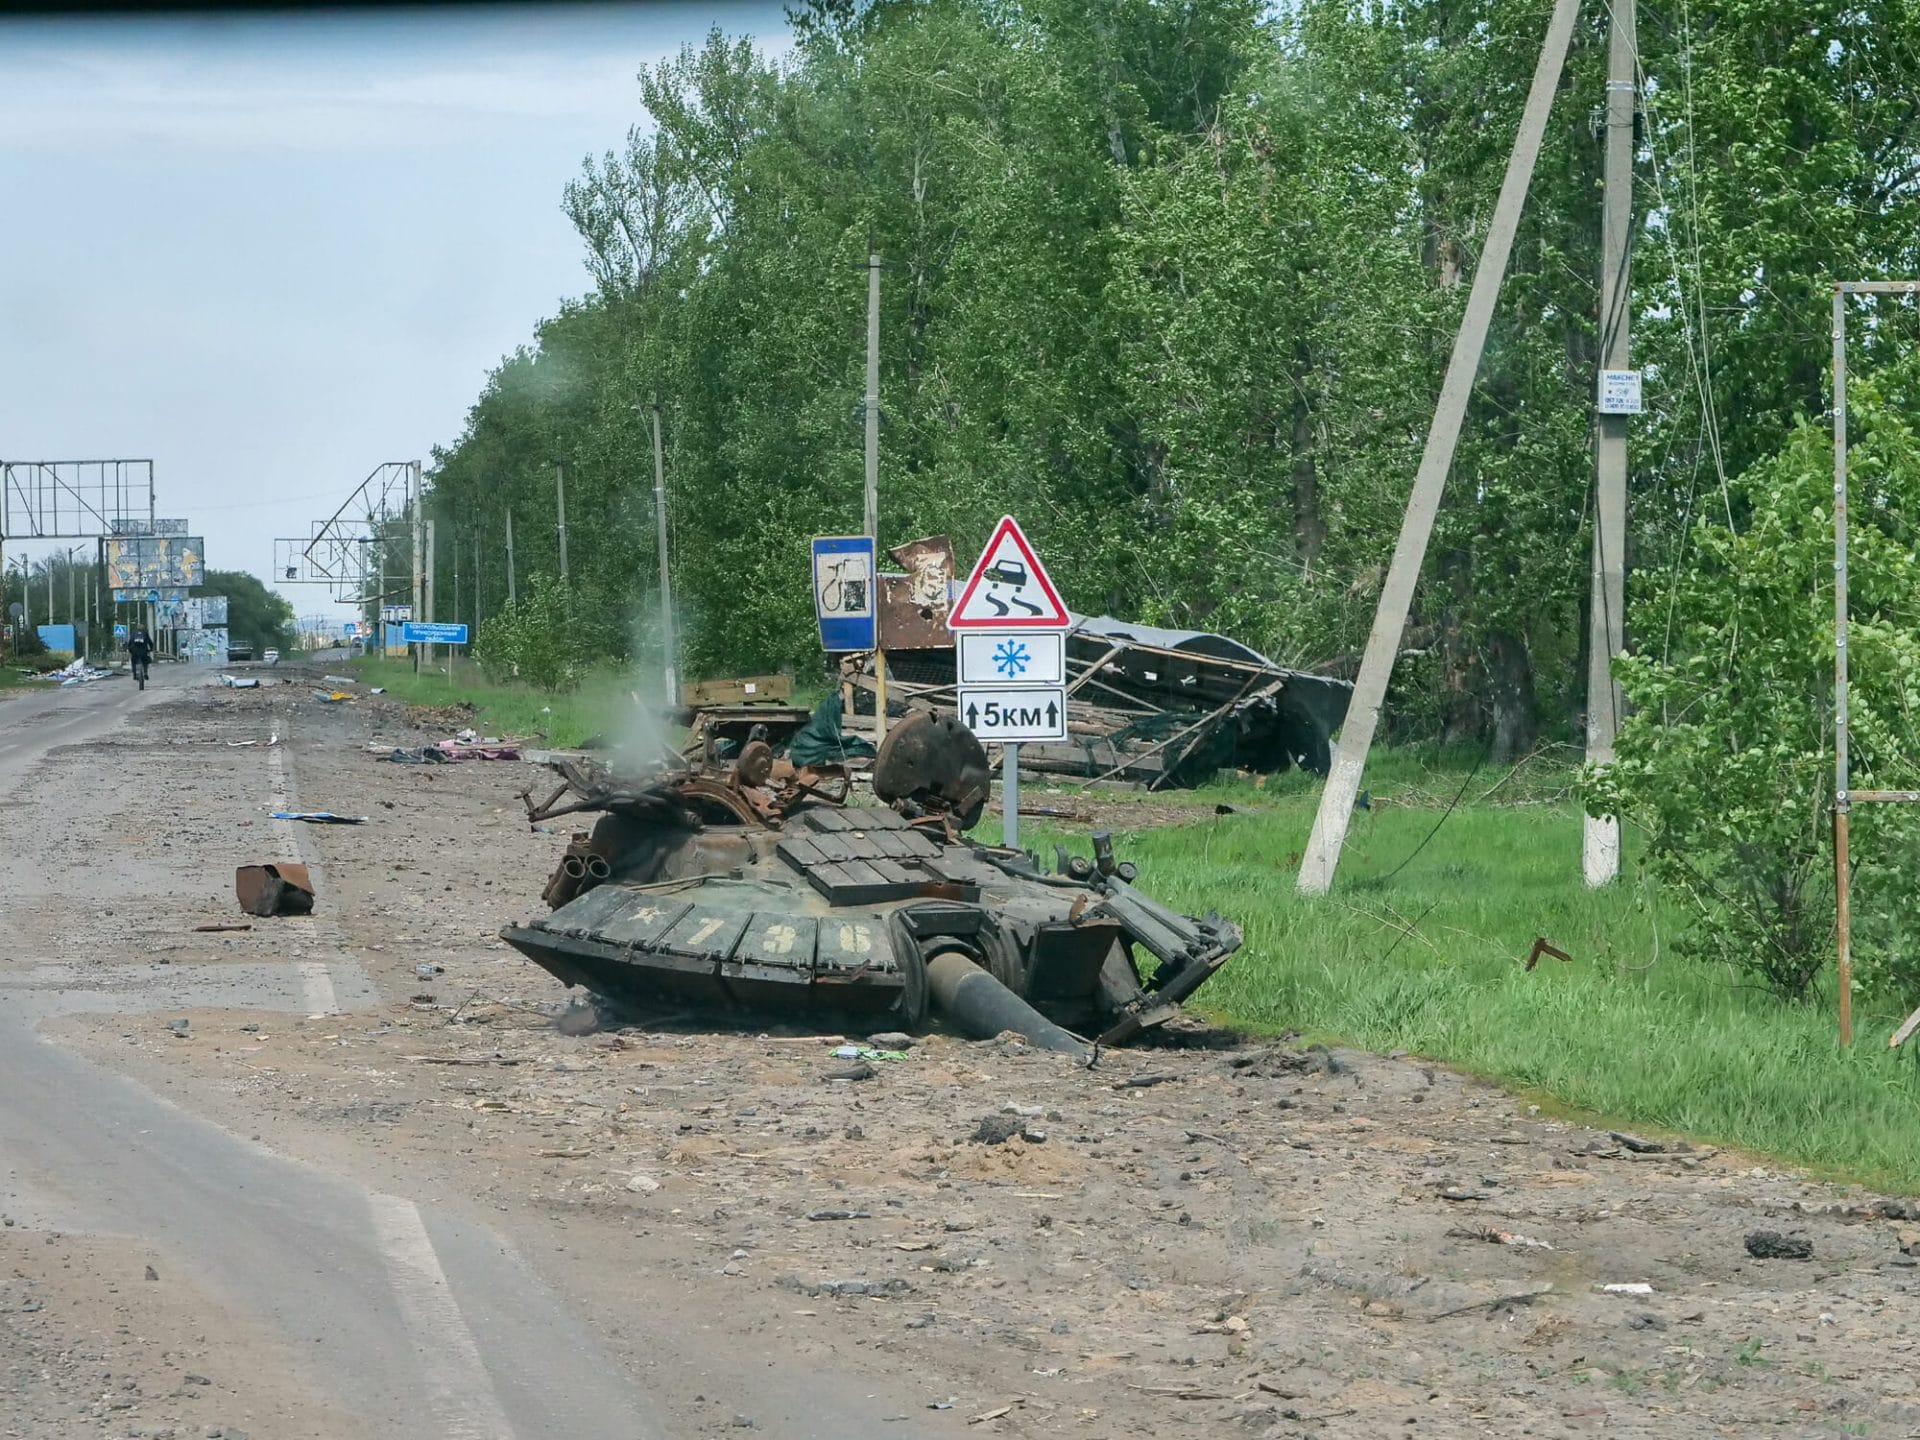 A destroyed tank stands on the side of the road in Kharkiv.